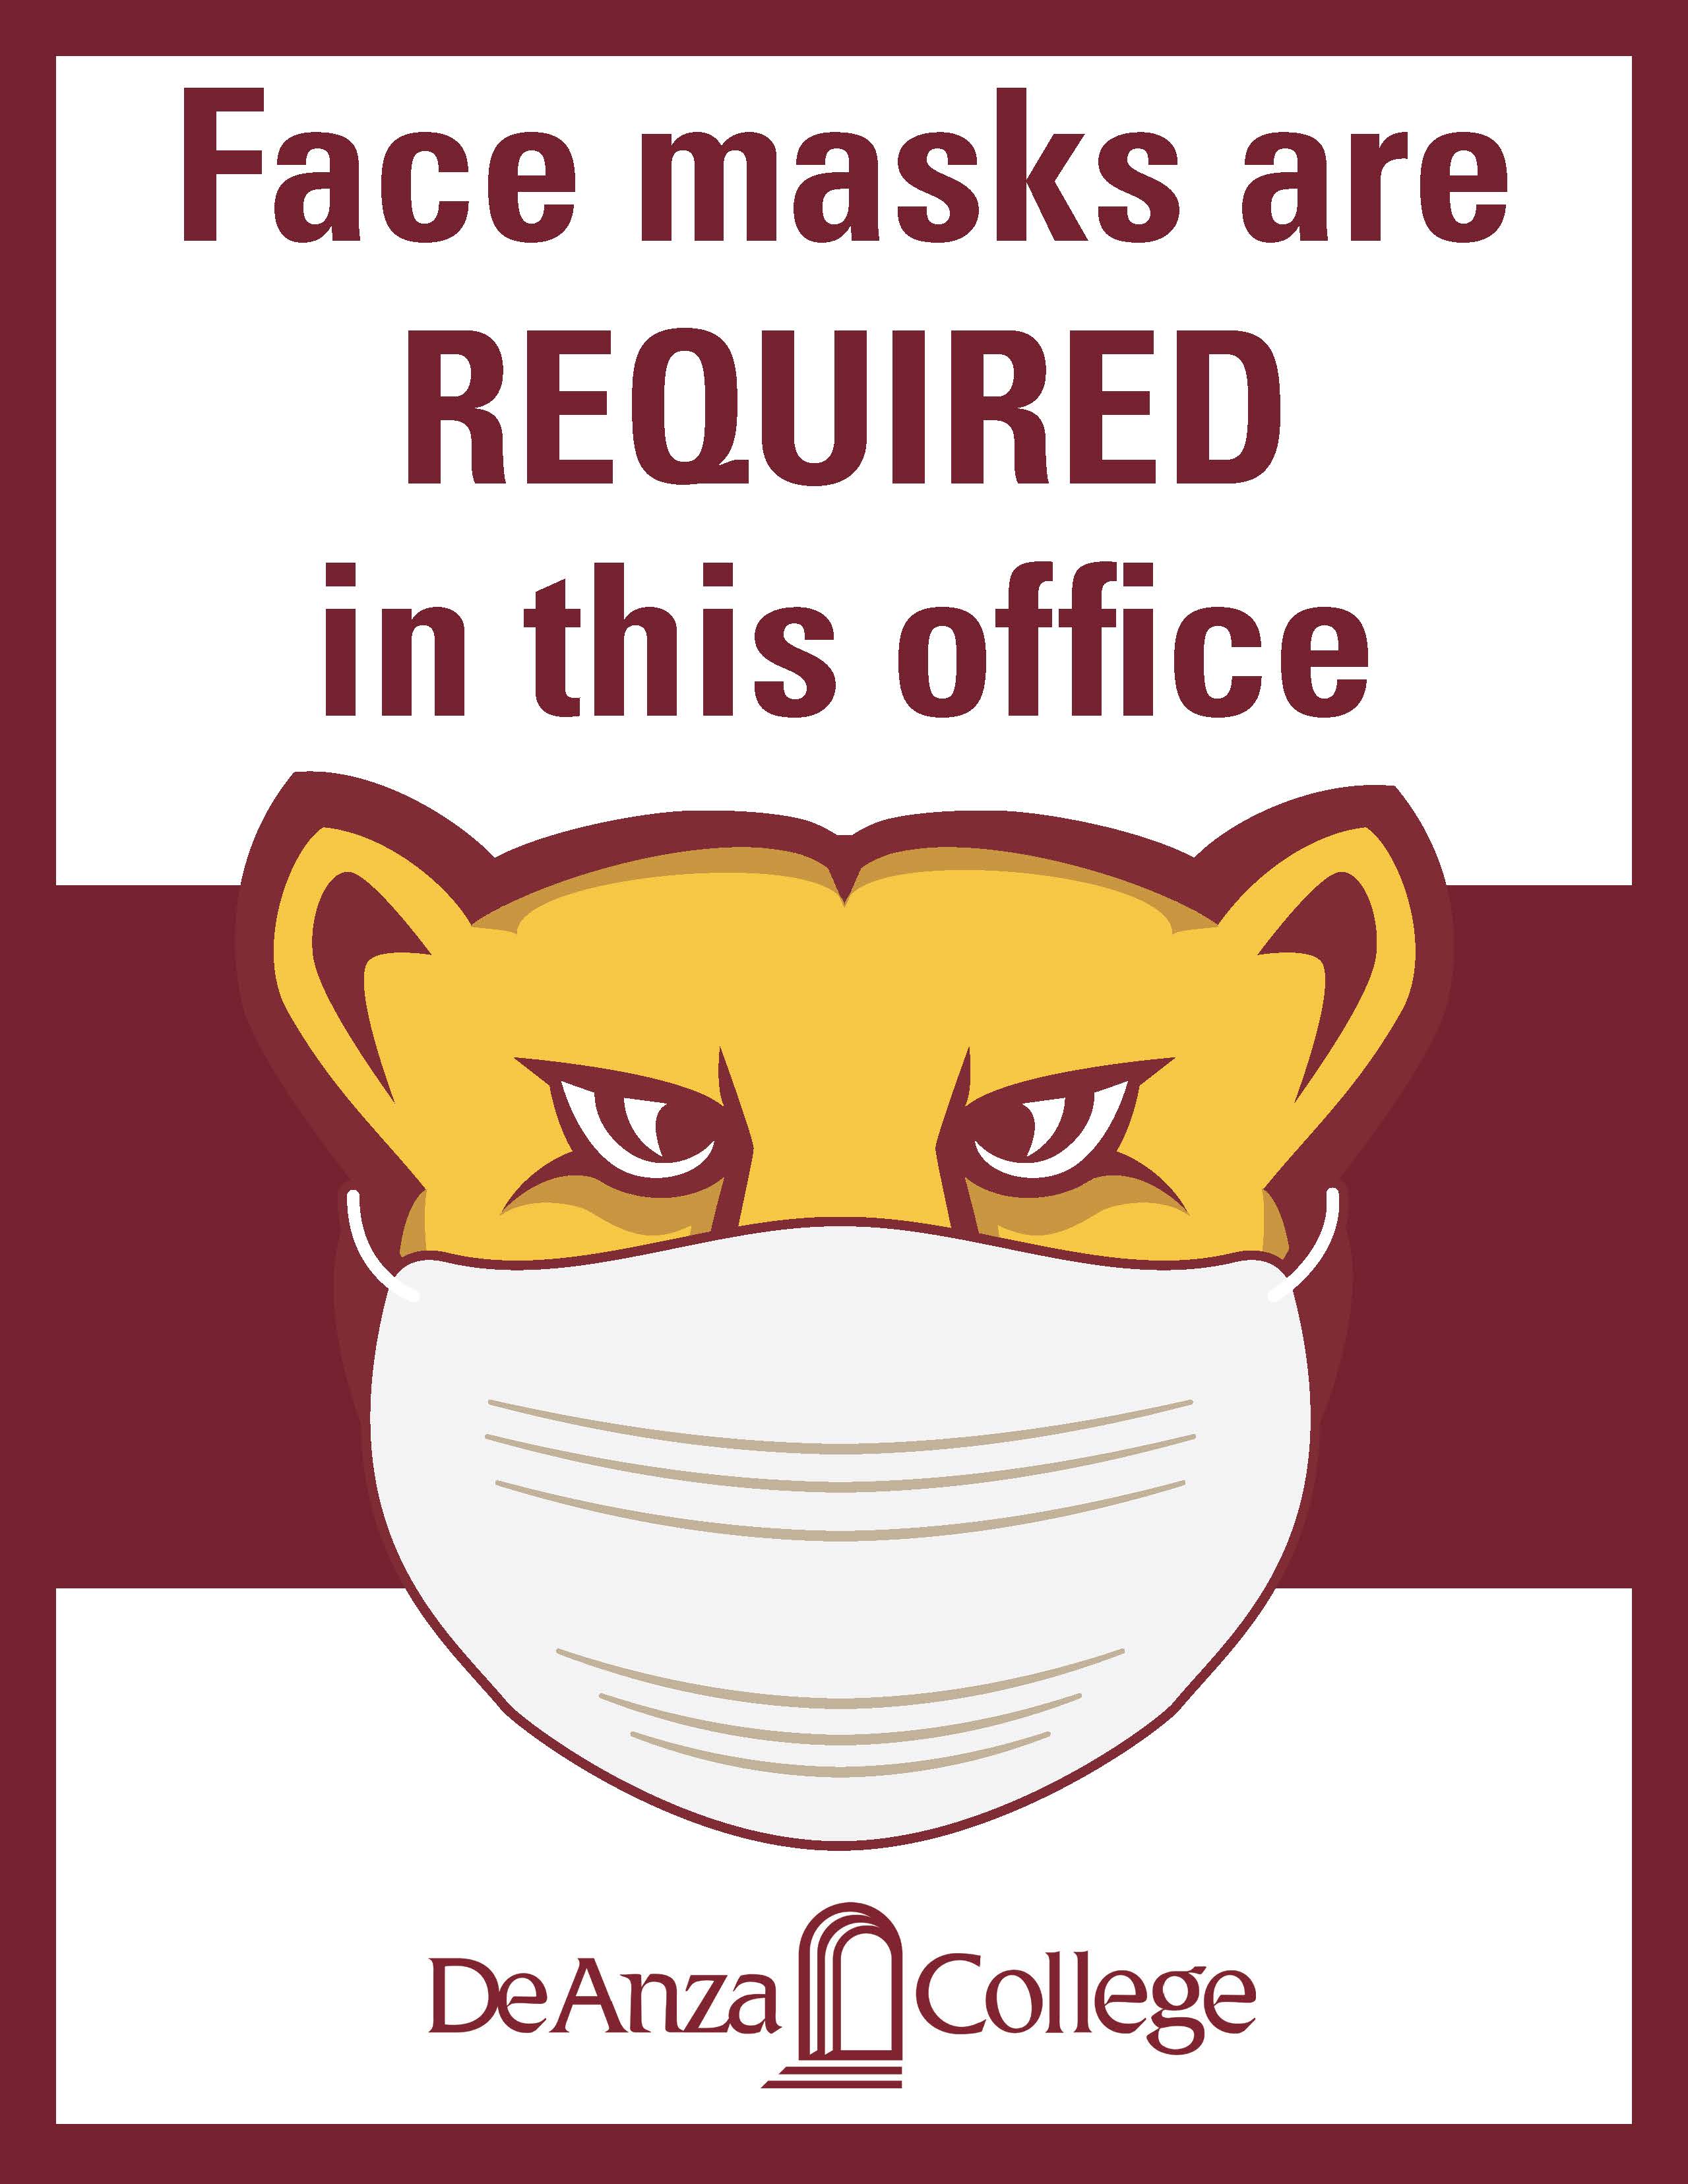 Face masks are REQUIRED in this office (Mountain lion)